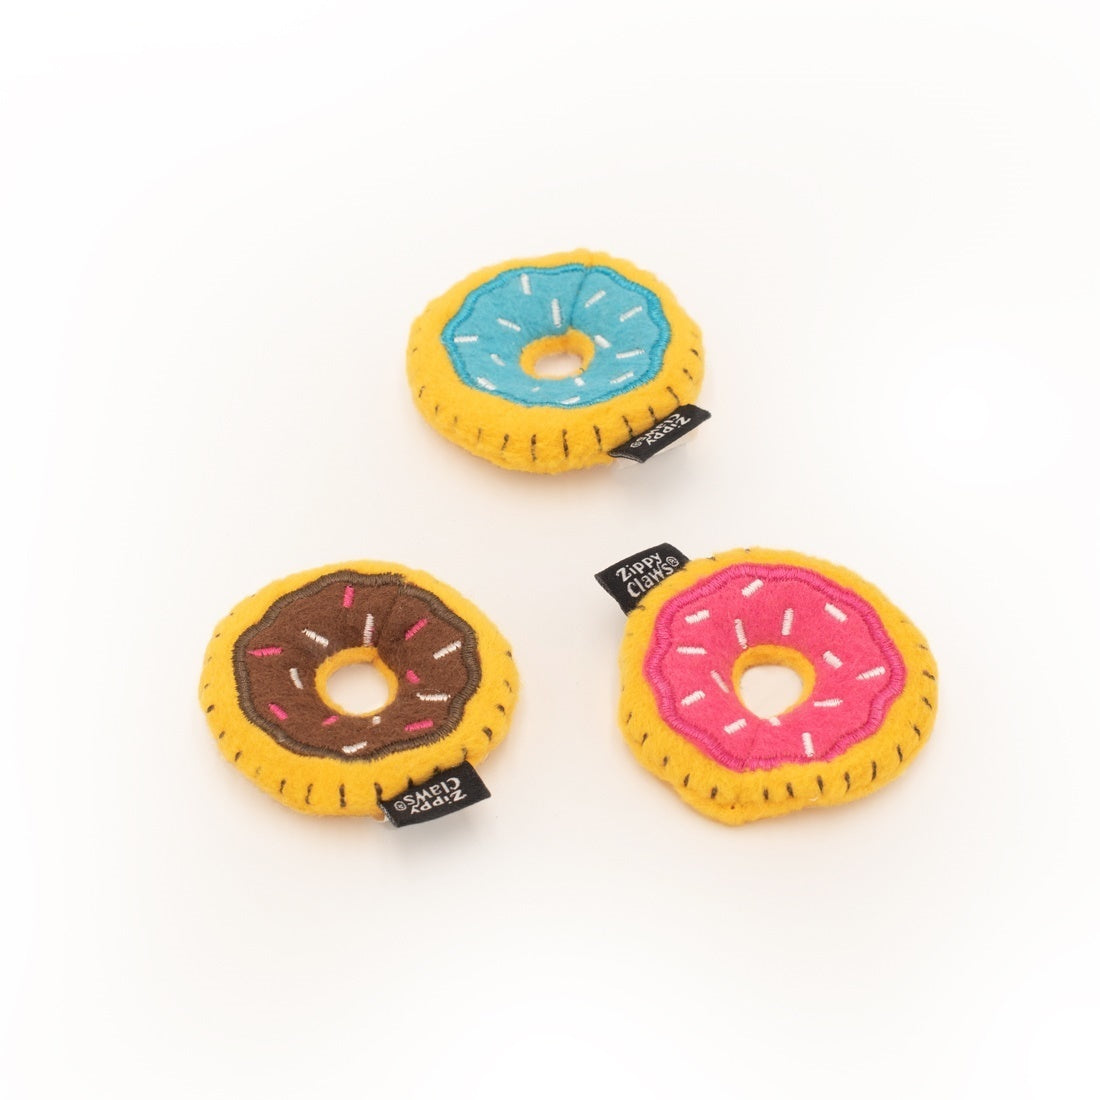 Zippy Paws ZippyClaws Mini Donutz Cat Toy 3-Pack - Pets and More